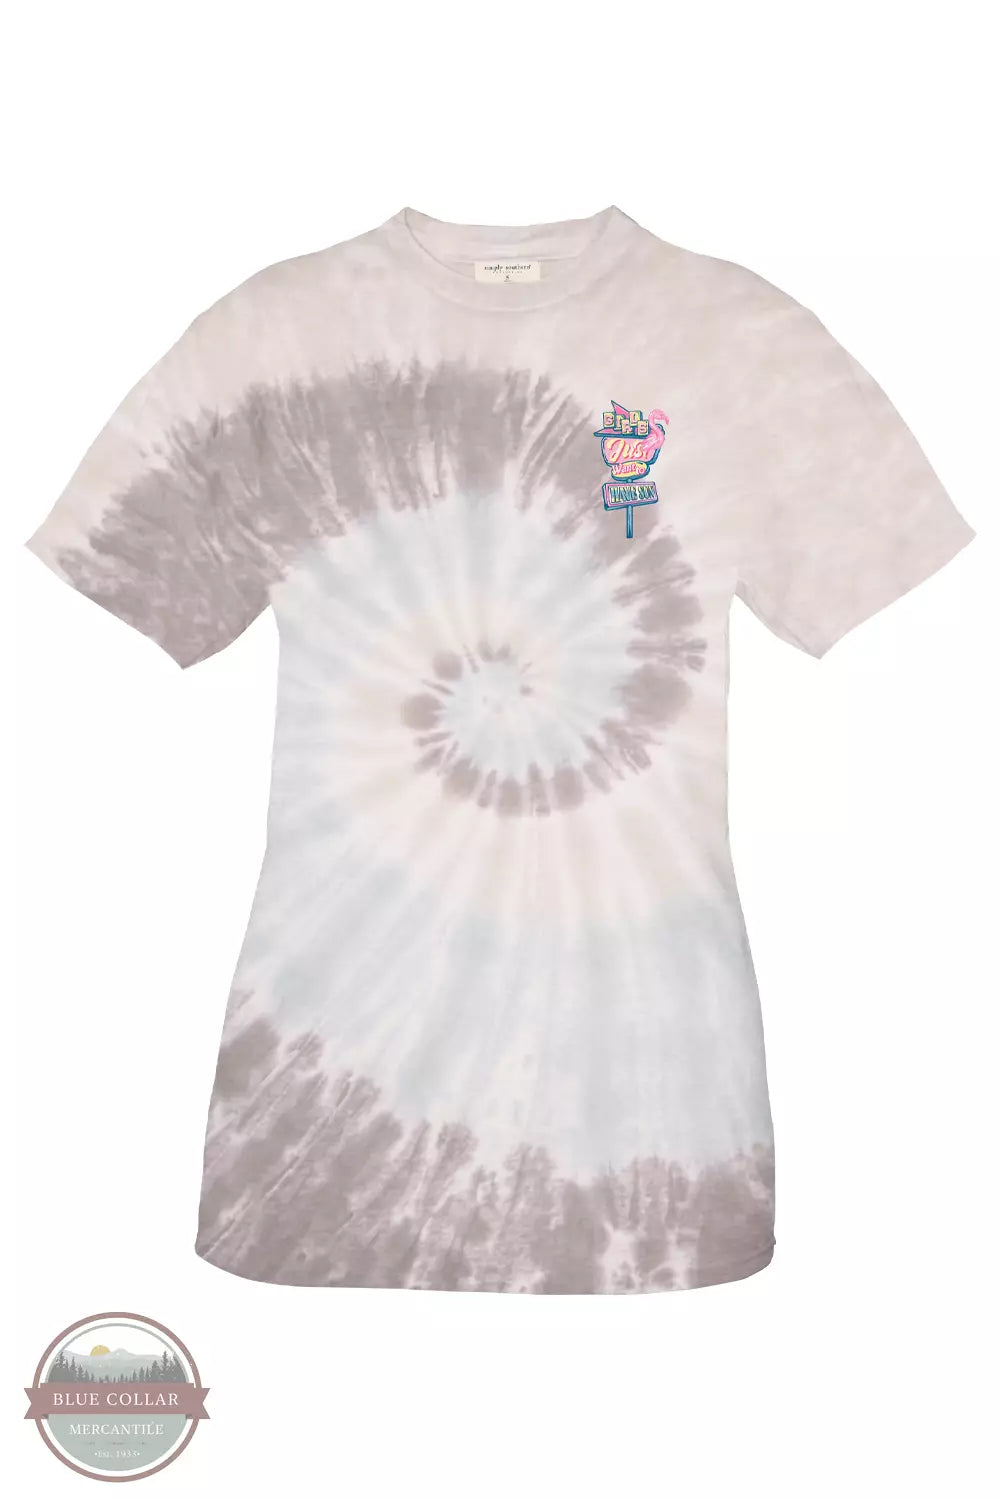 Simply Southern SS-FLAMINGO-MANTEO Girls Just Want to Have Sun T-Shirt in Manteo Tie Dye Front View